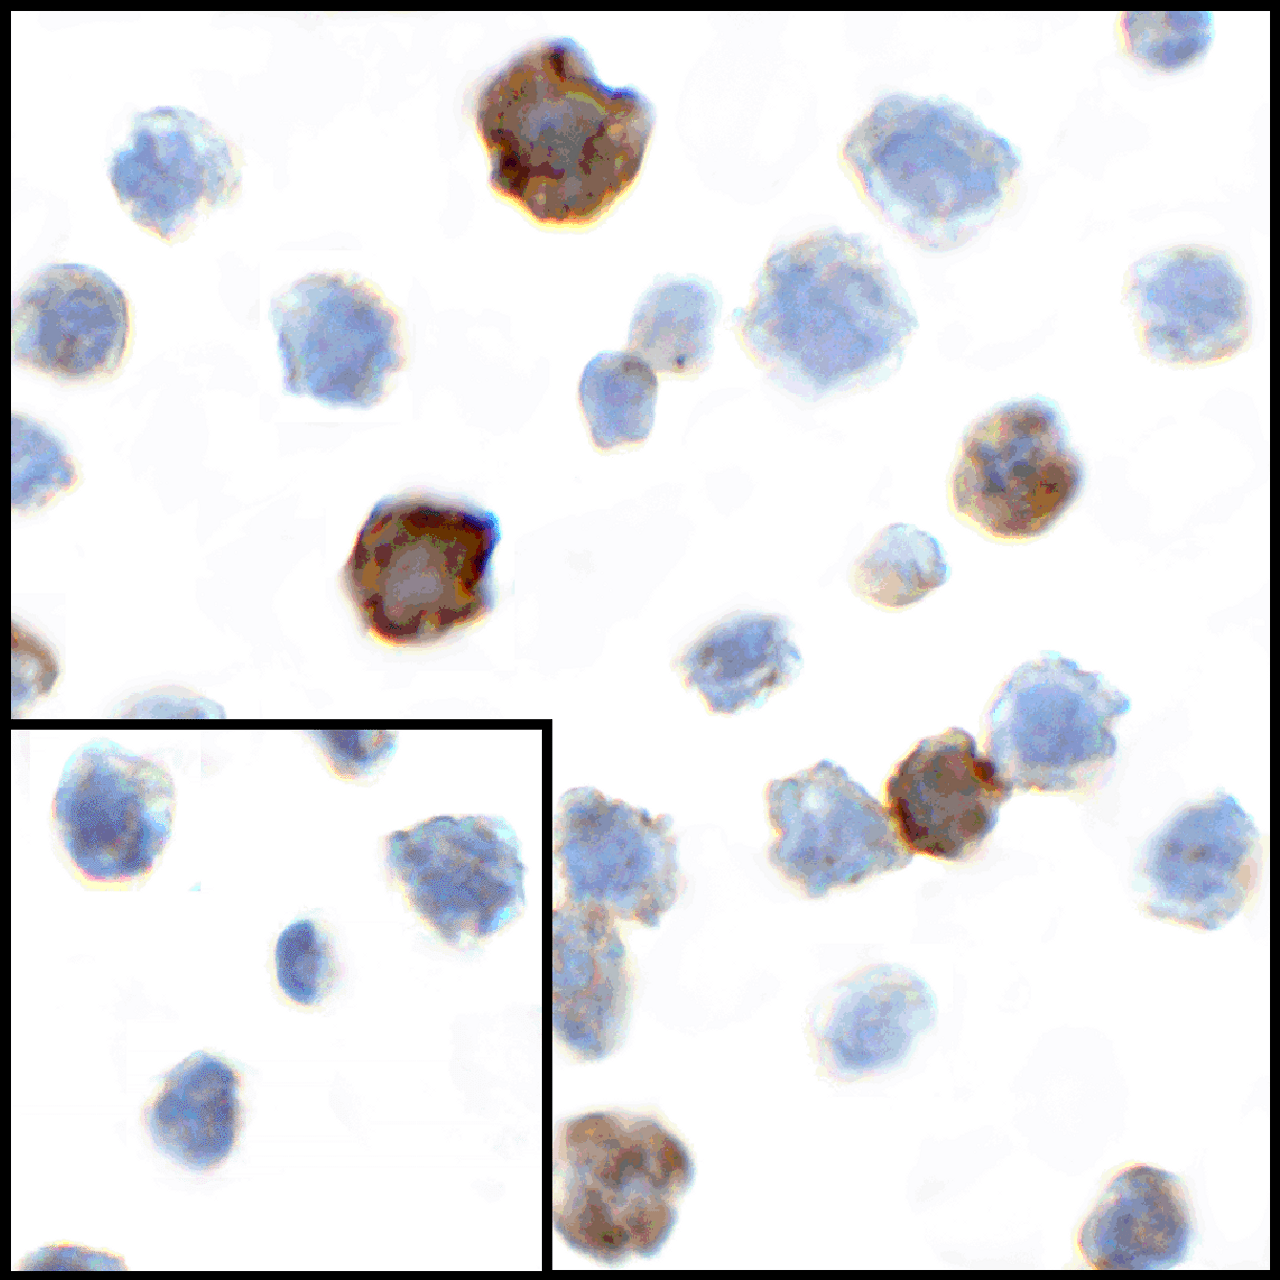 Immunocytochemistry of CD80 in transfected HEK293 cells with CD80 antibody at 1 ug/mL. Lower left: Immunocytochemistry in transfected HEK293 cells with control mouse IgG antibody at 1 ug/mL.